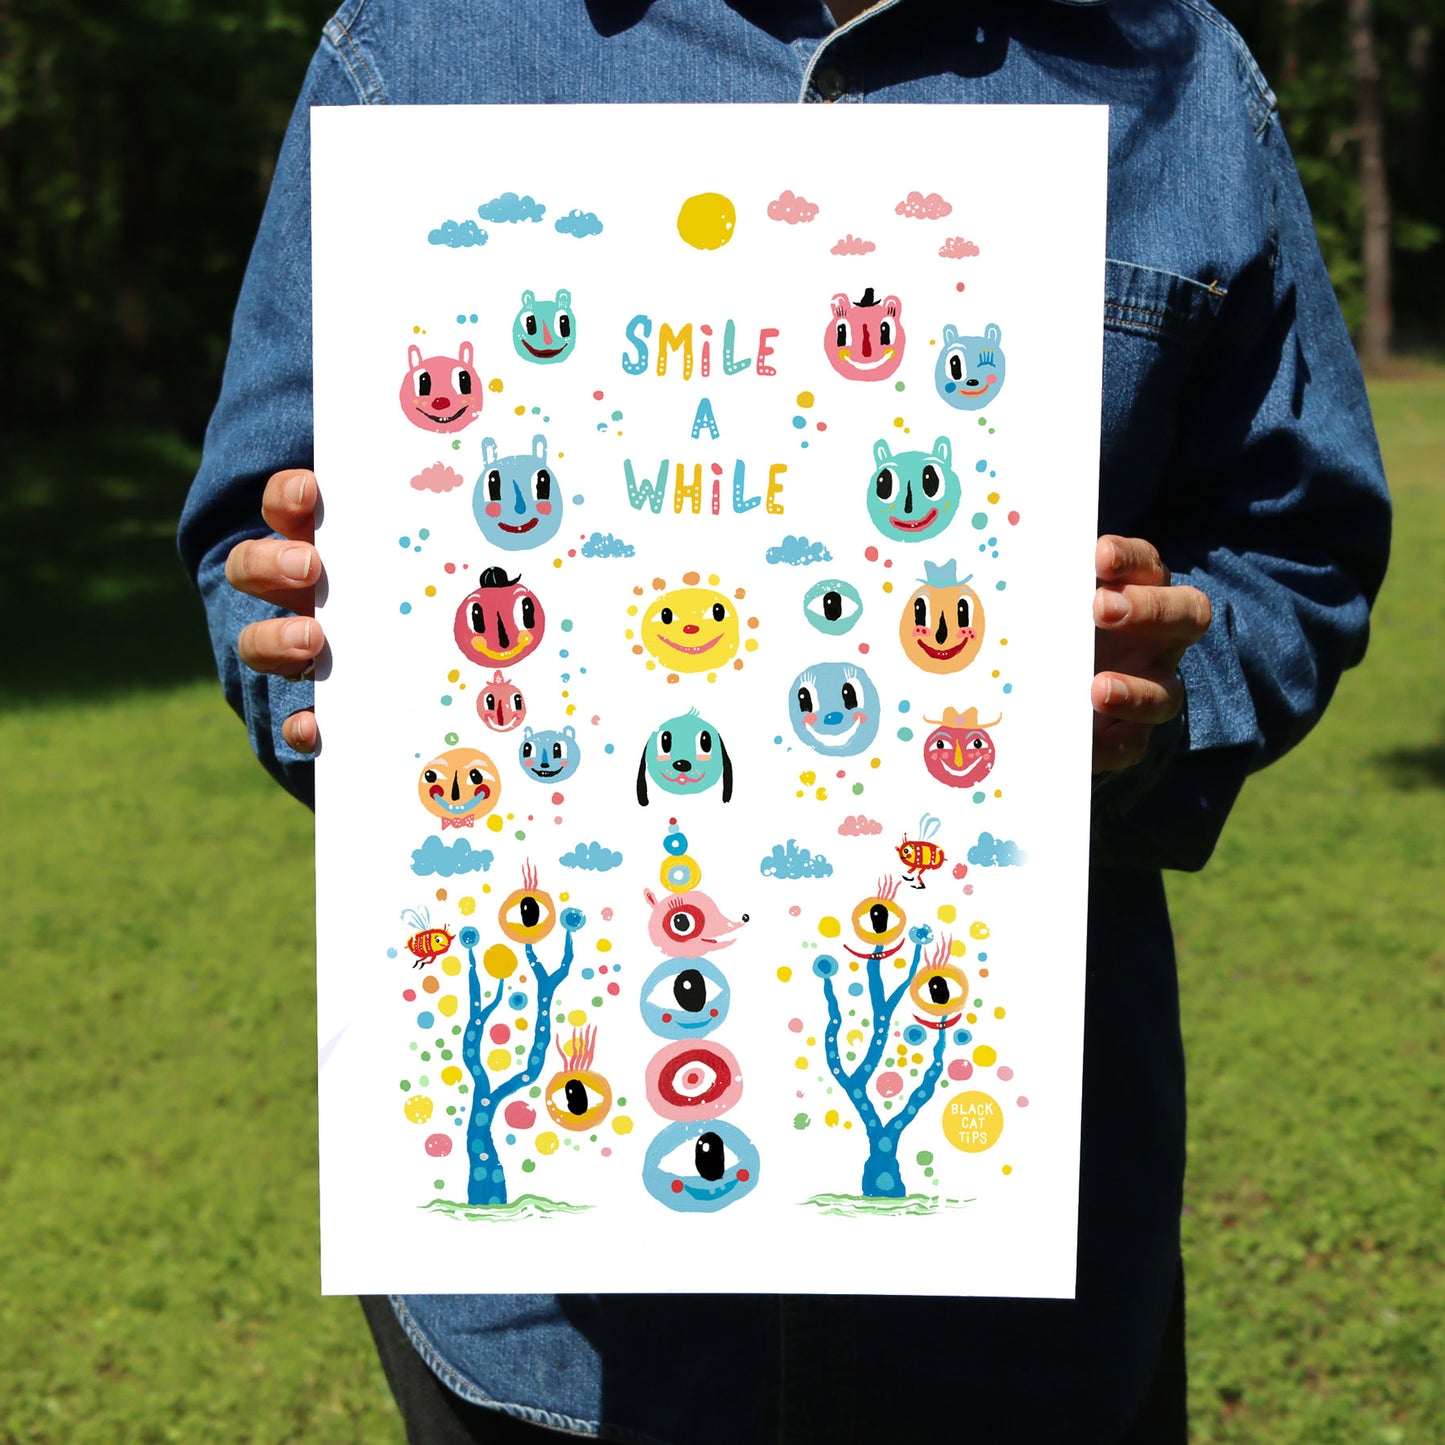 Smile A While Poster - Sunny Day